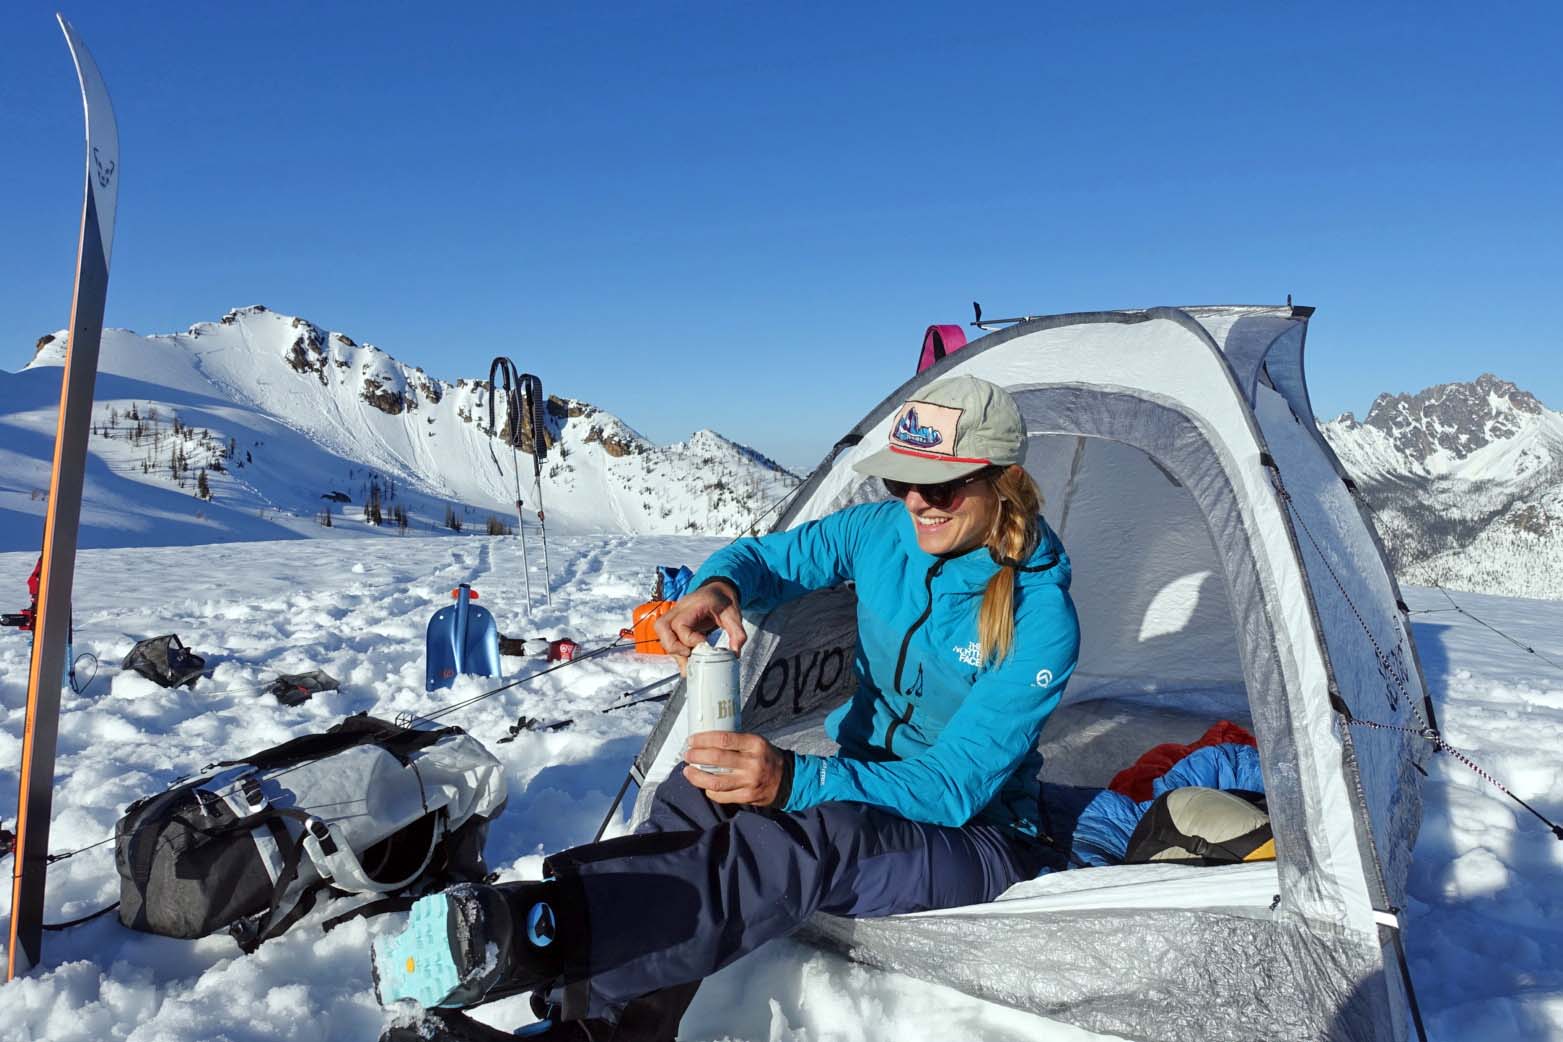 Winter camping checklist (opening drink in tent)